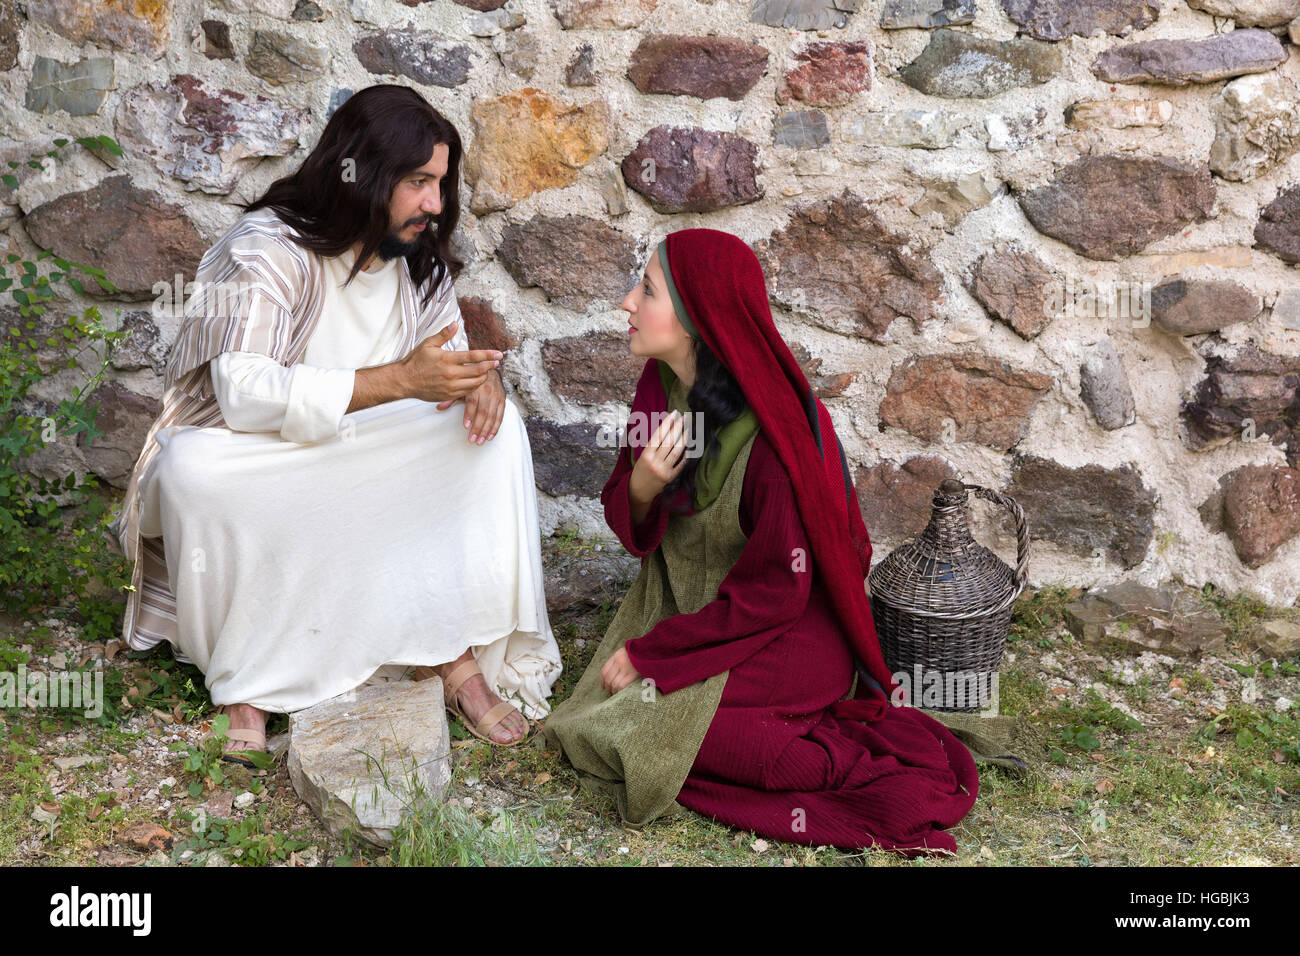 Repentant sinner woman asking for forgiveness and healing Stock Photo